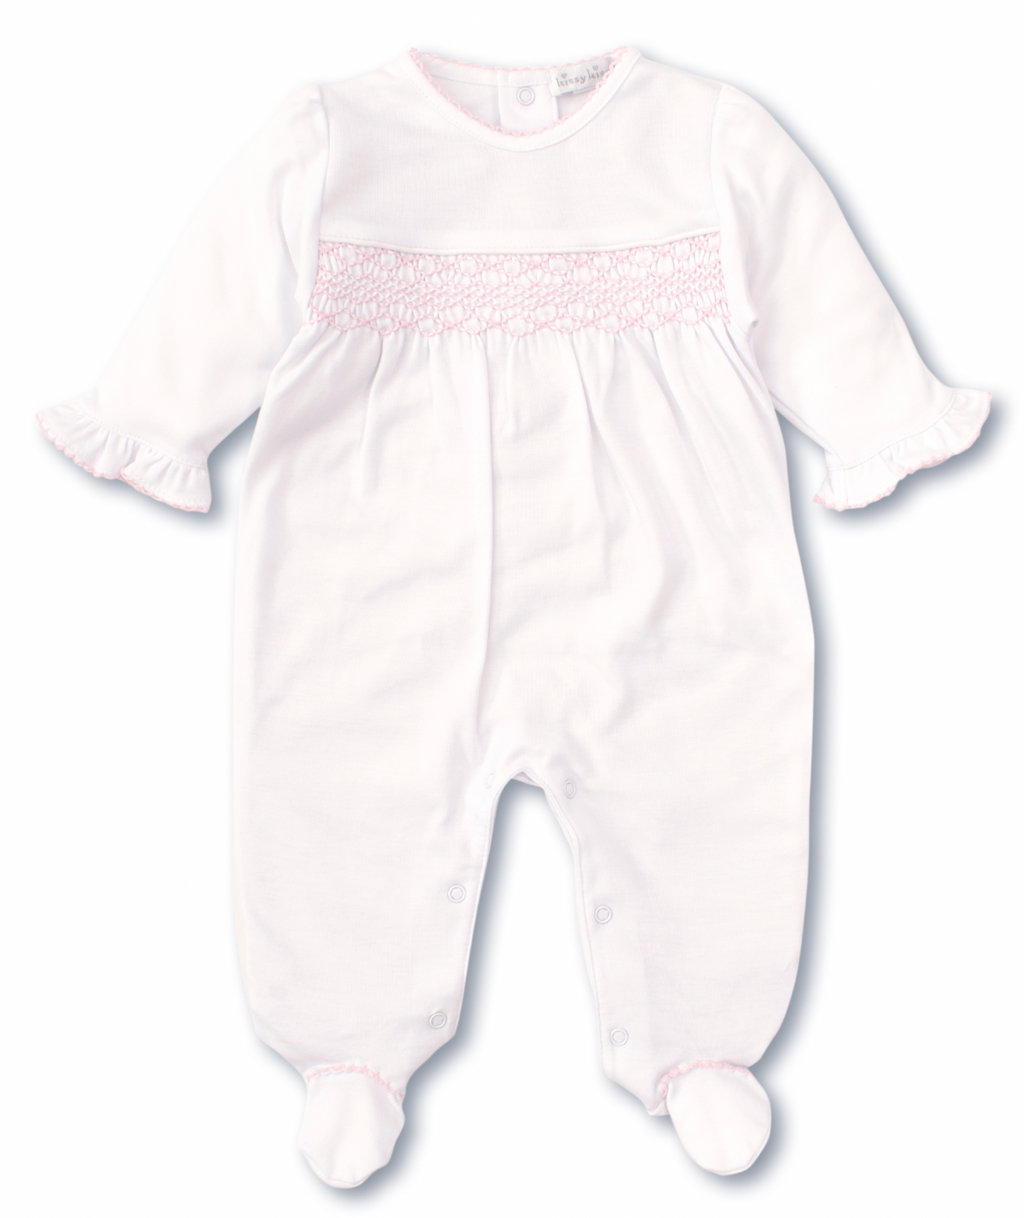 Kissy Kissy Classic White and Pink Footie with Hand Smocking